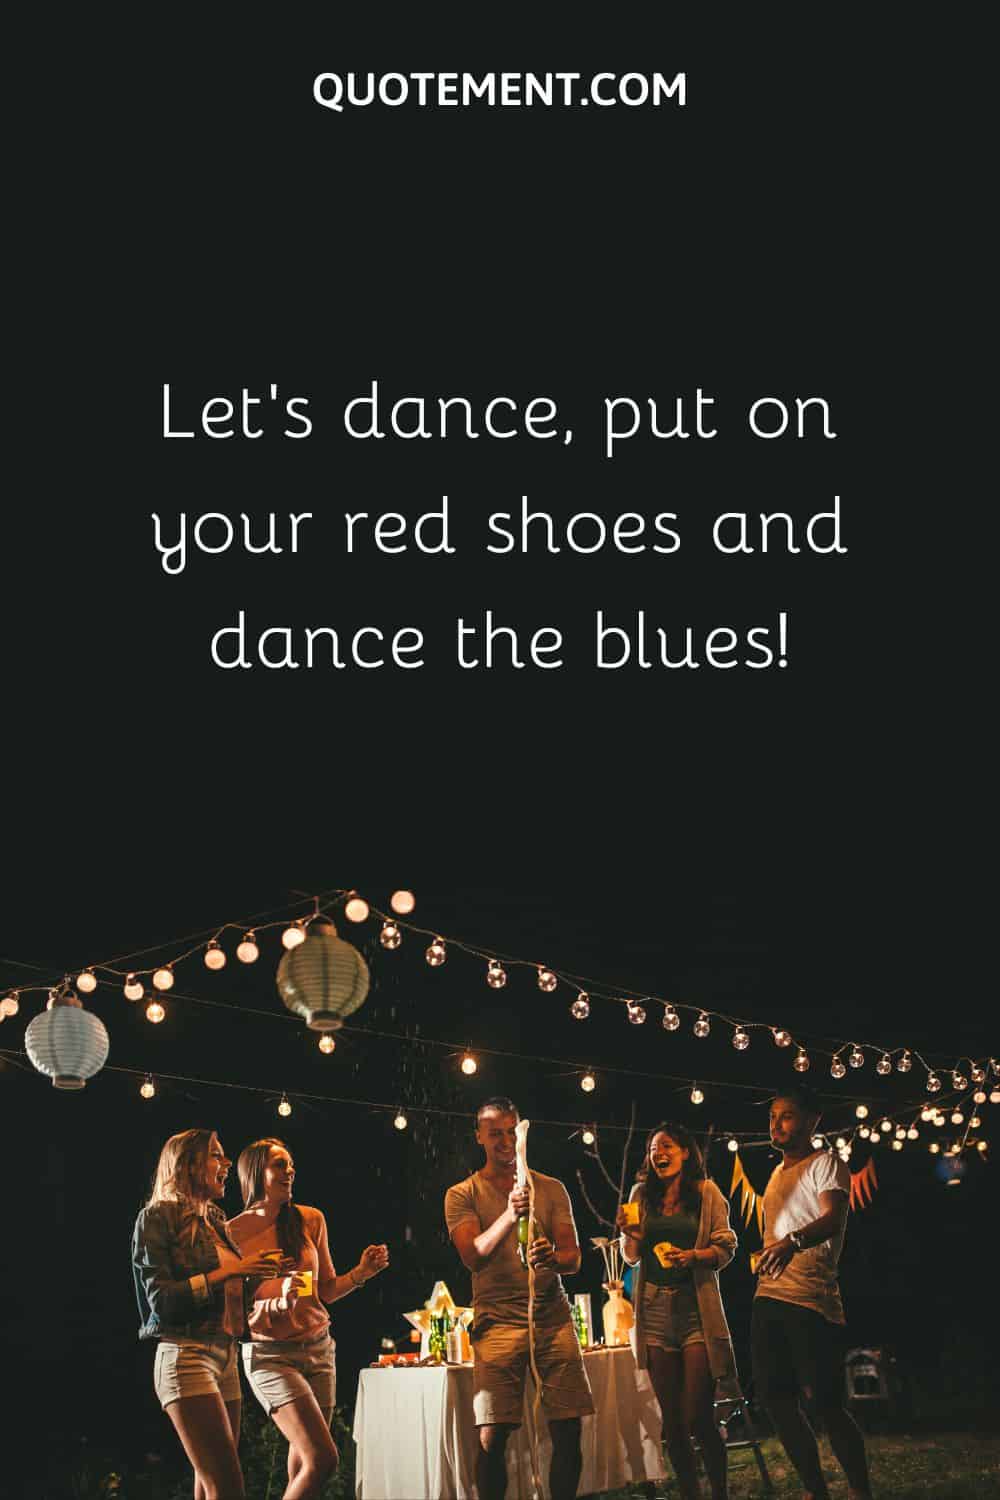 Let's dance, put on your red shoes and dance the blues